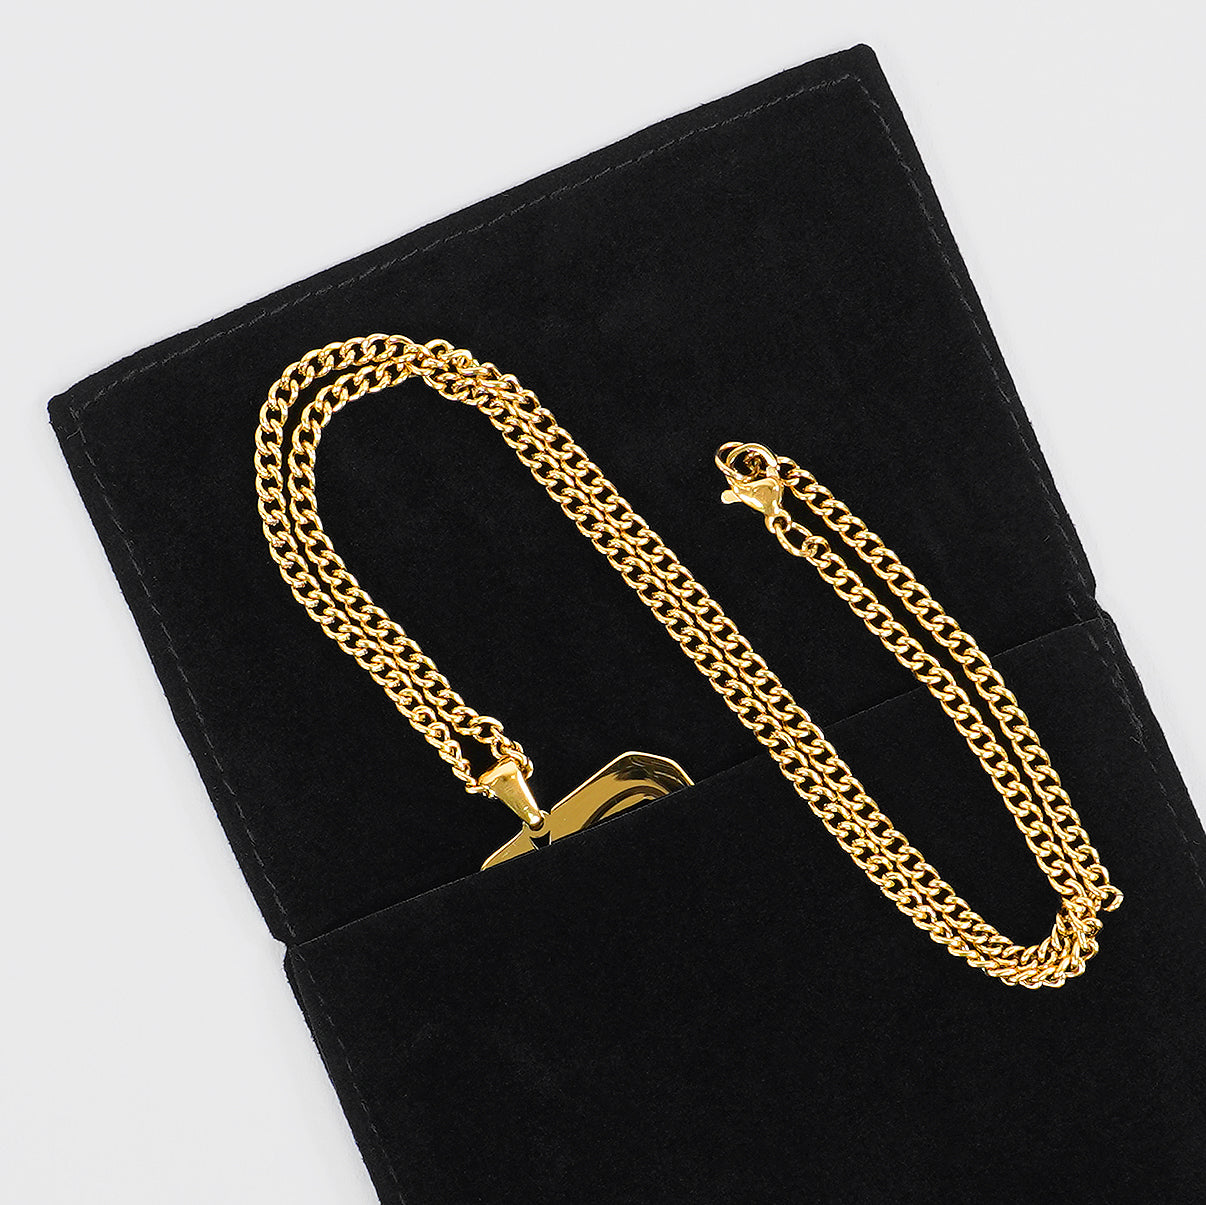 73 Number Pendant with Chain Necklace - Gold Plated Stainless Steel